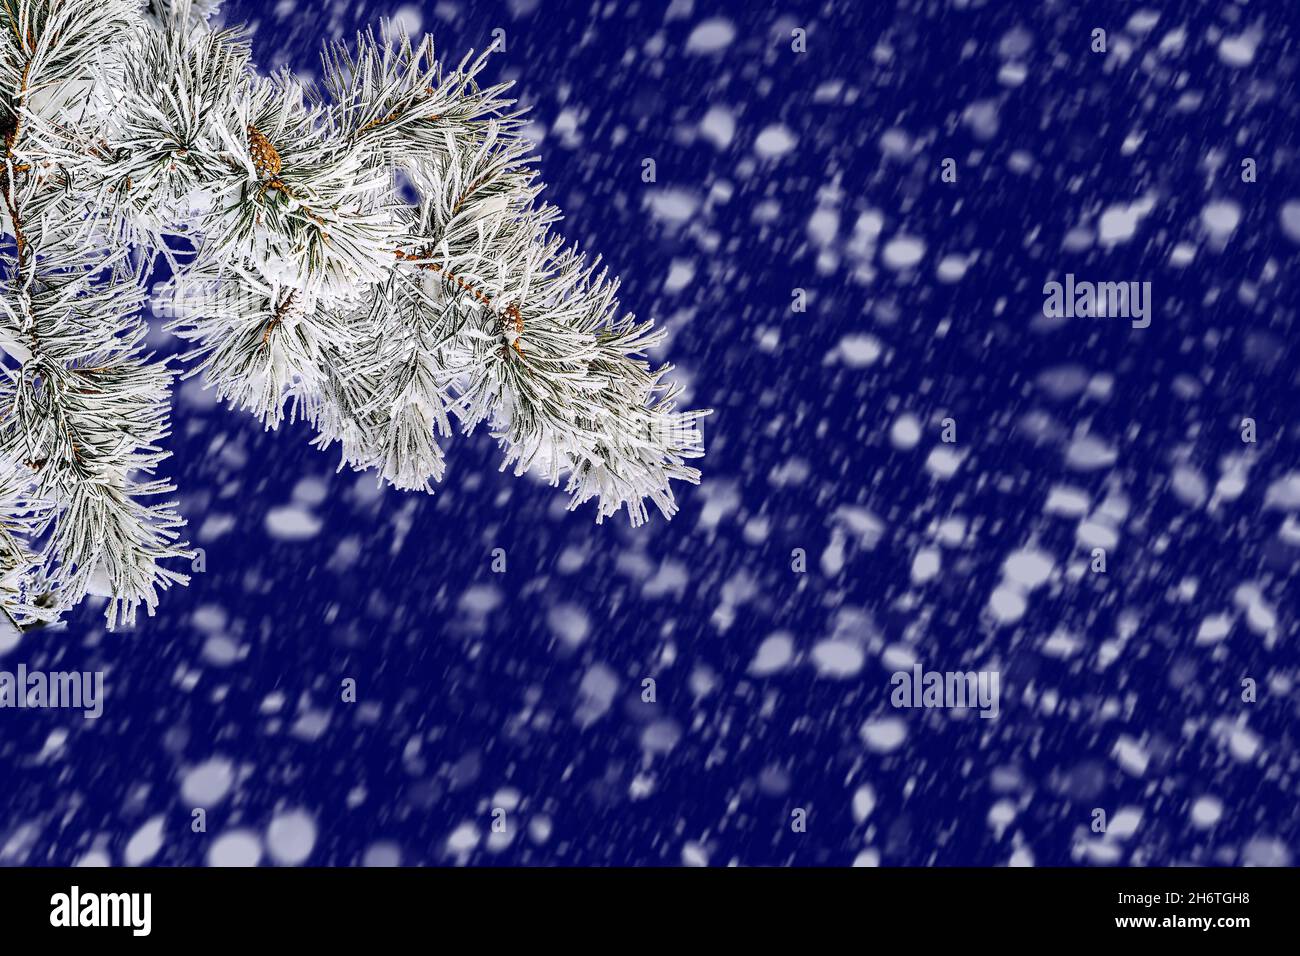 Pine tree branch with snow and hoarfrost covered close up on blue night background at heavy snowfall. Winter Christmas landscape for advertising or gr Stock Photo